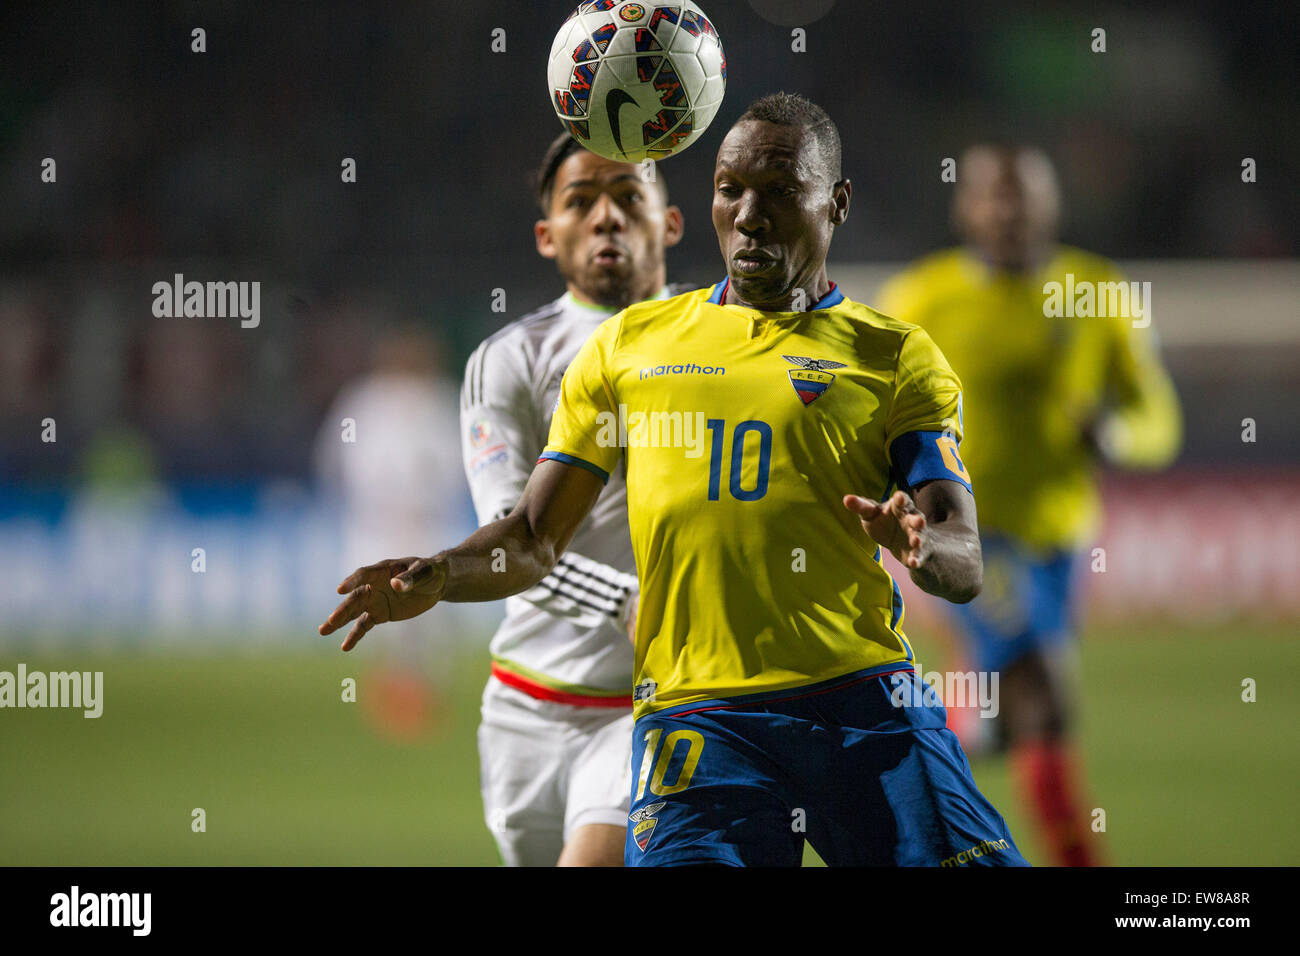 Rancagua, Chile. 19th June, 2015. Mexico's Javier Aquino (back) vies with Ecuador's Walter Ayovi (front) during the Group A match of the Copa America Chile 2015, held in the El Teniente stadium, in Rancagua, Chile, on June 19, 2015. Ecuador won 2-1. Credit:  Luis Echeverria/Xinhua/Alamy Live News Stock Photo